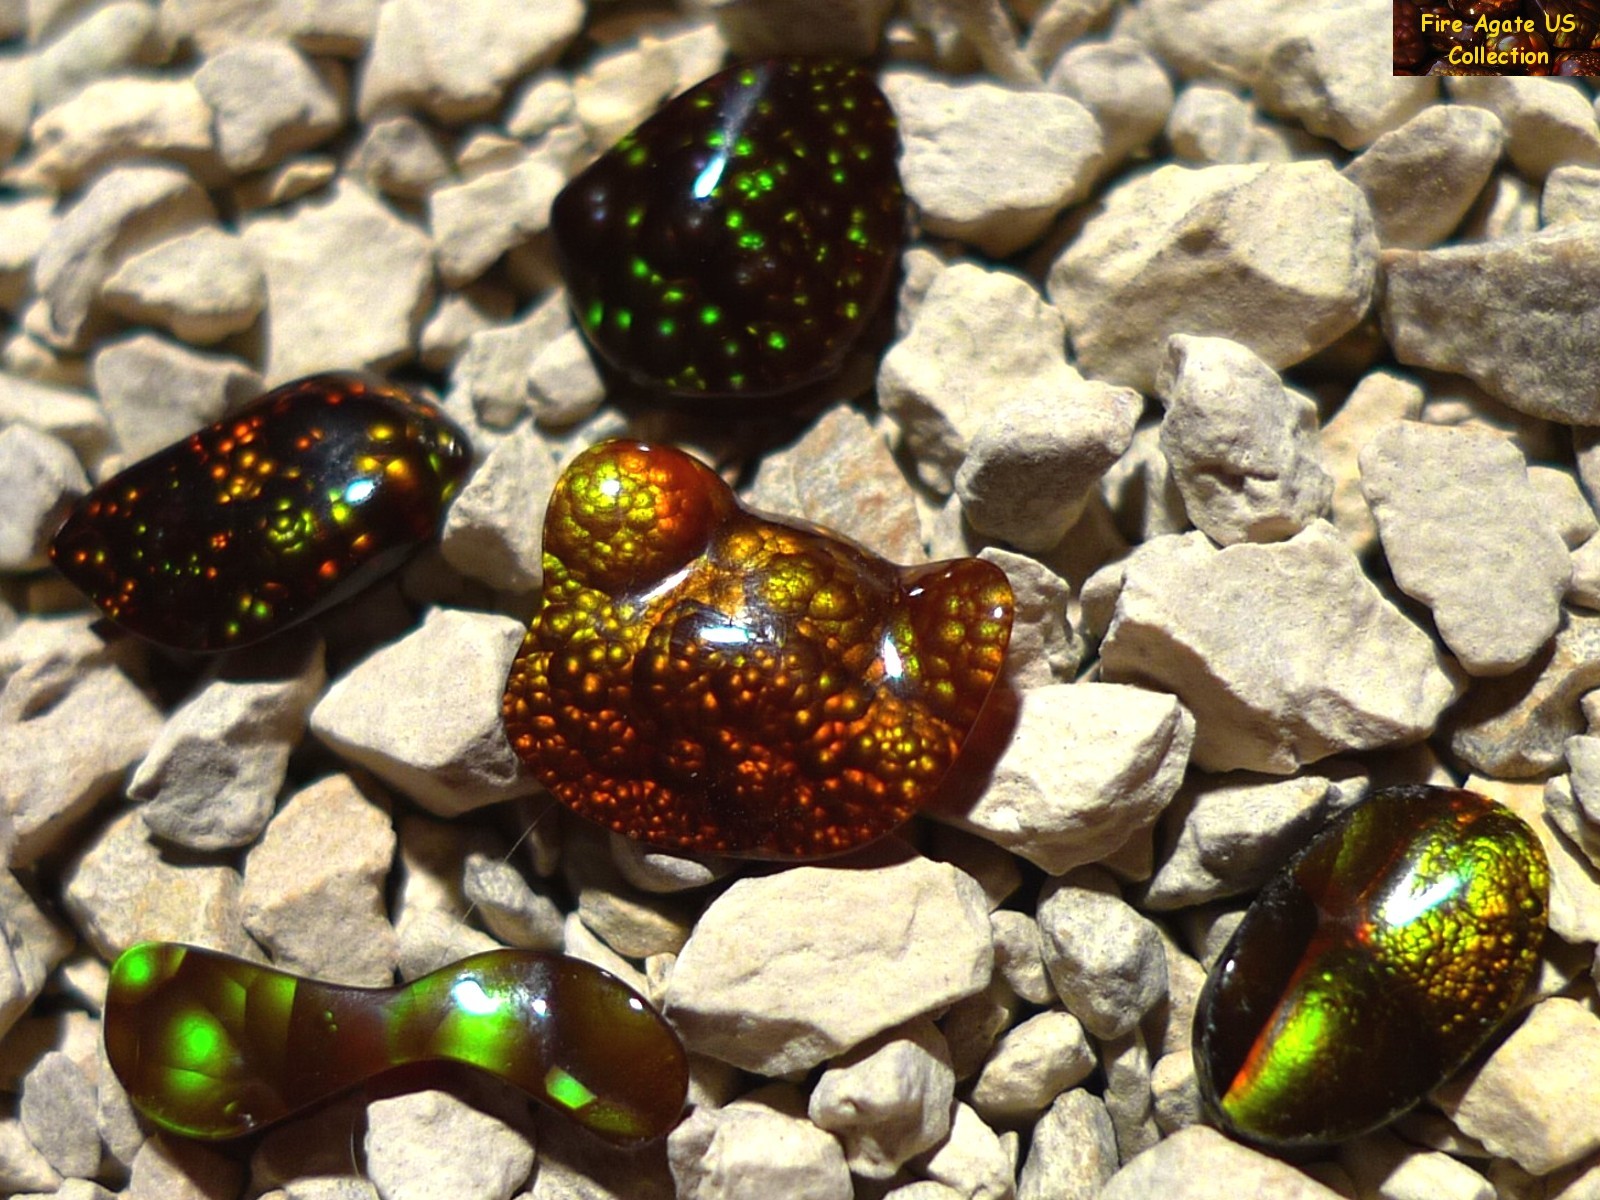 Group of Five Fire Agate Cabochons 4.6 Total Carat Weight Deer Creek Slaughter Mountain Arizona Gems SLG068 Photo 4